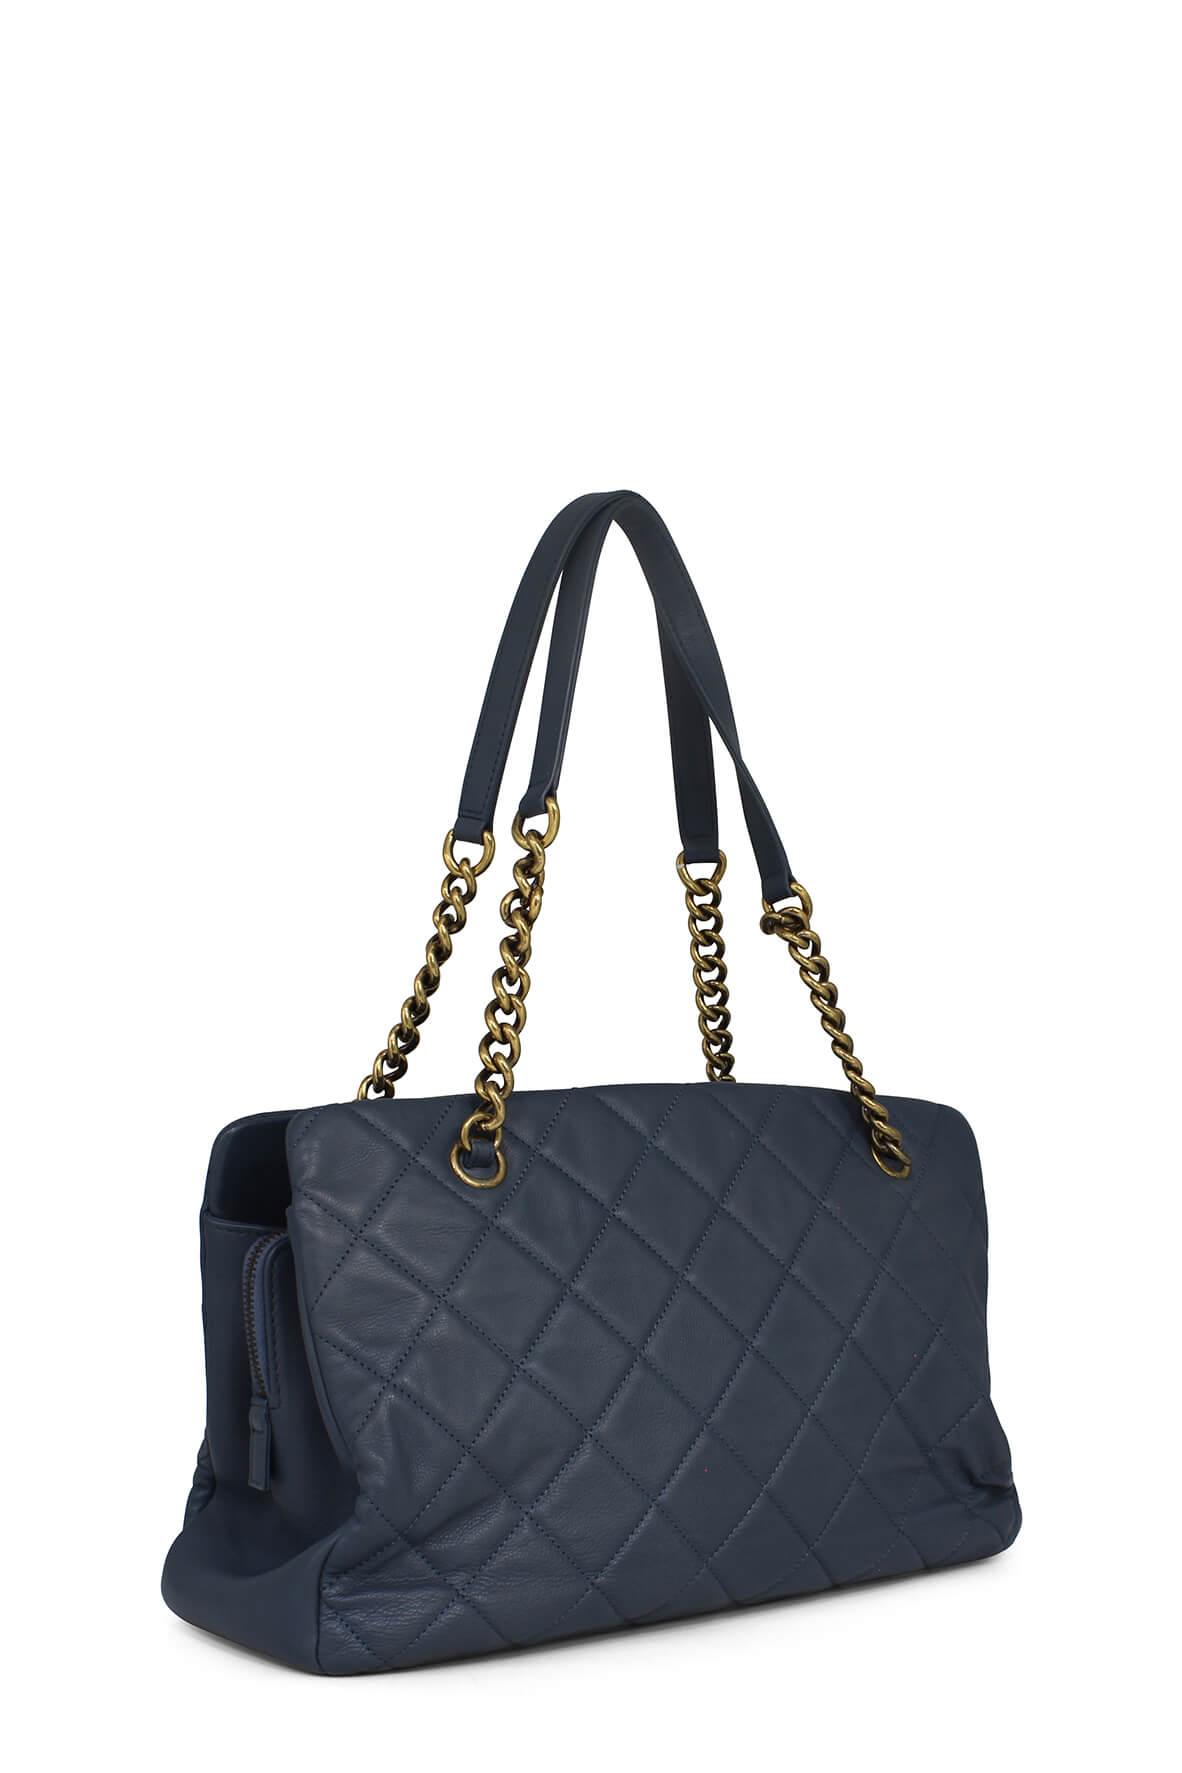 chanel navy blue tote bag